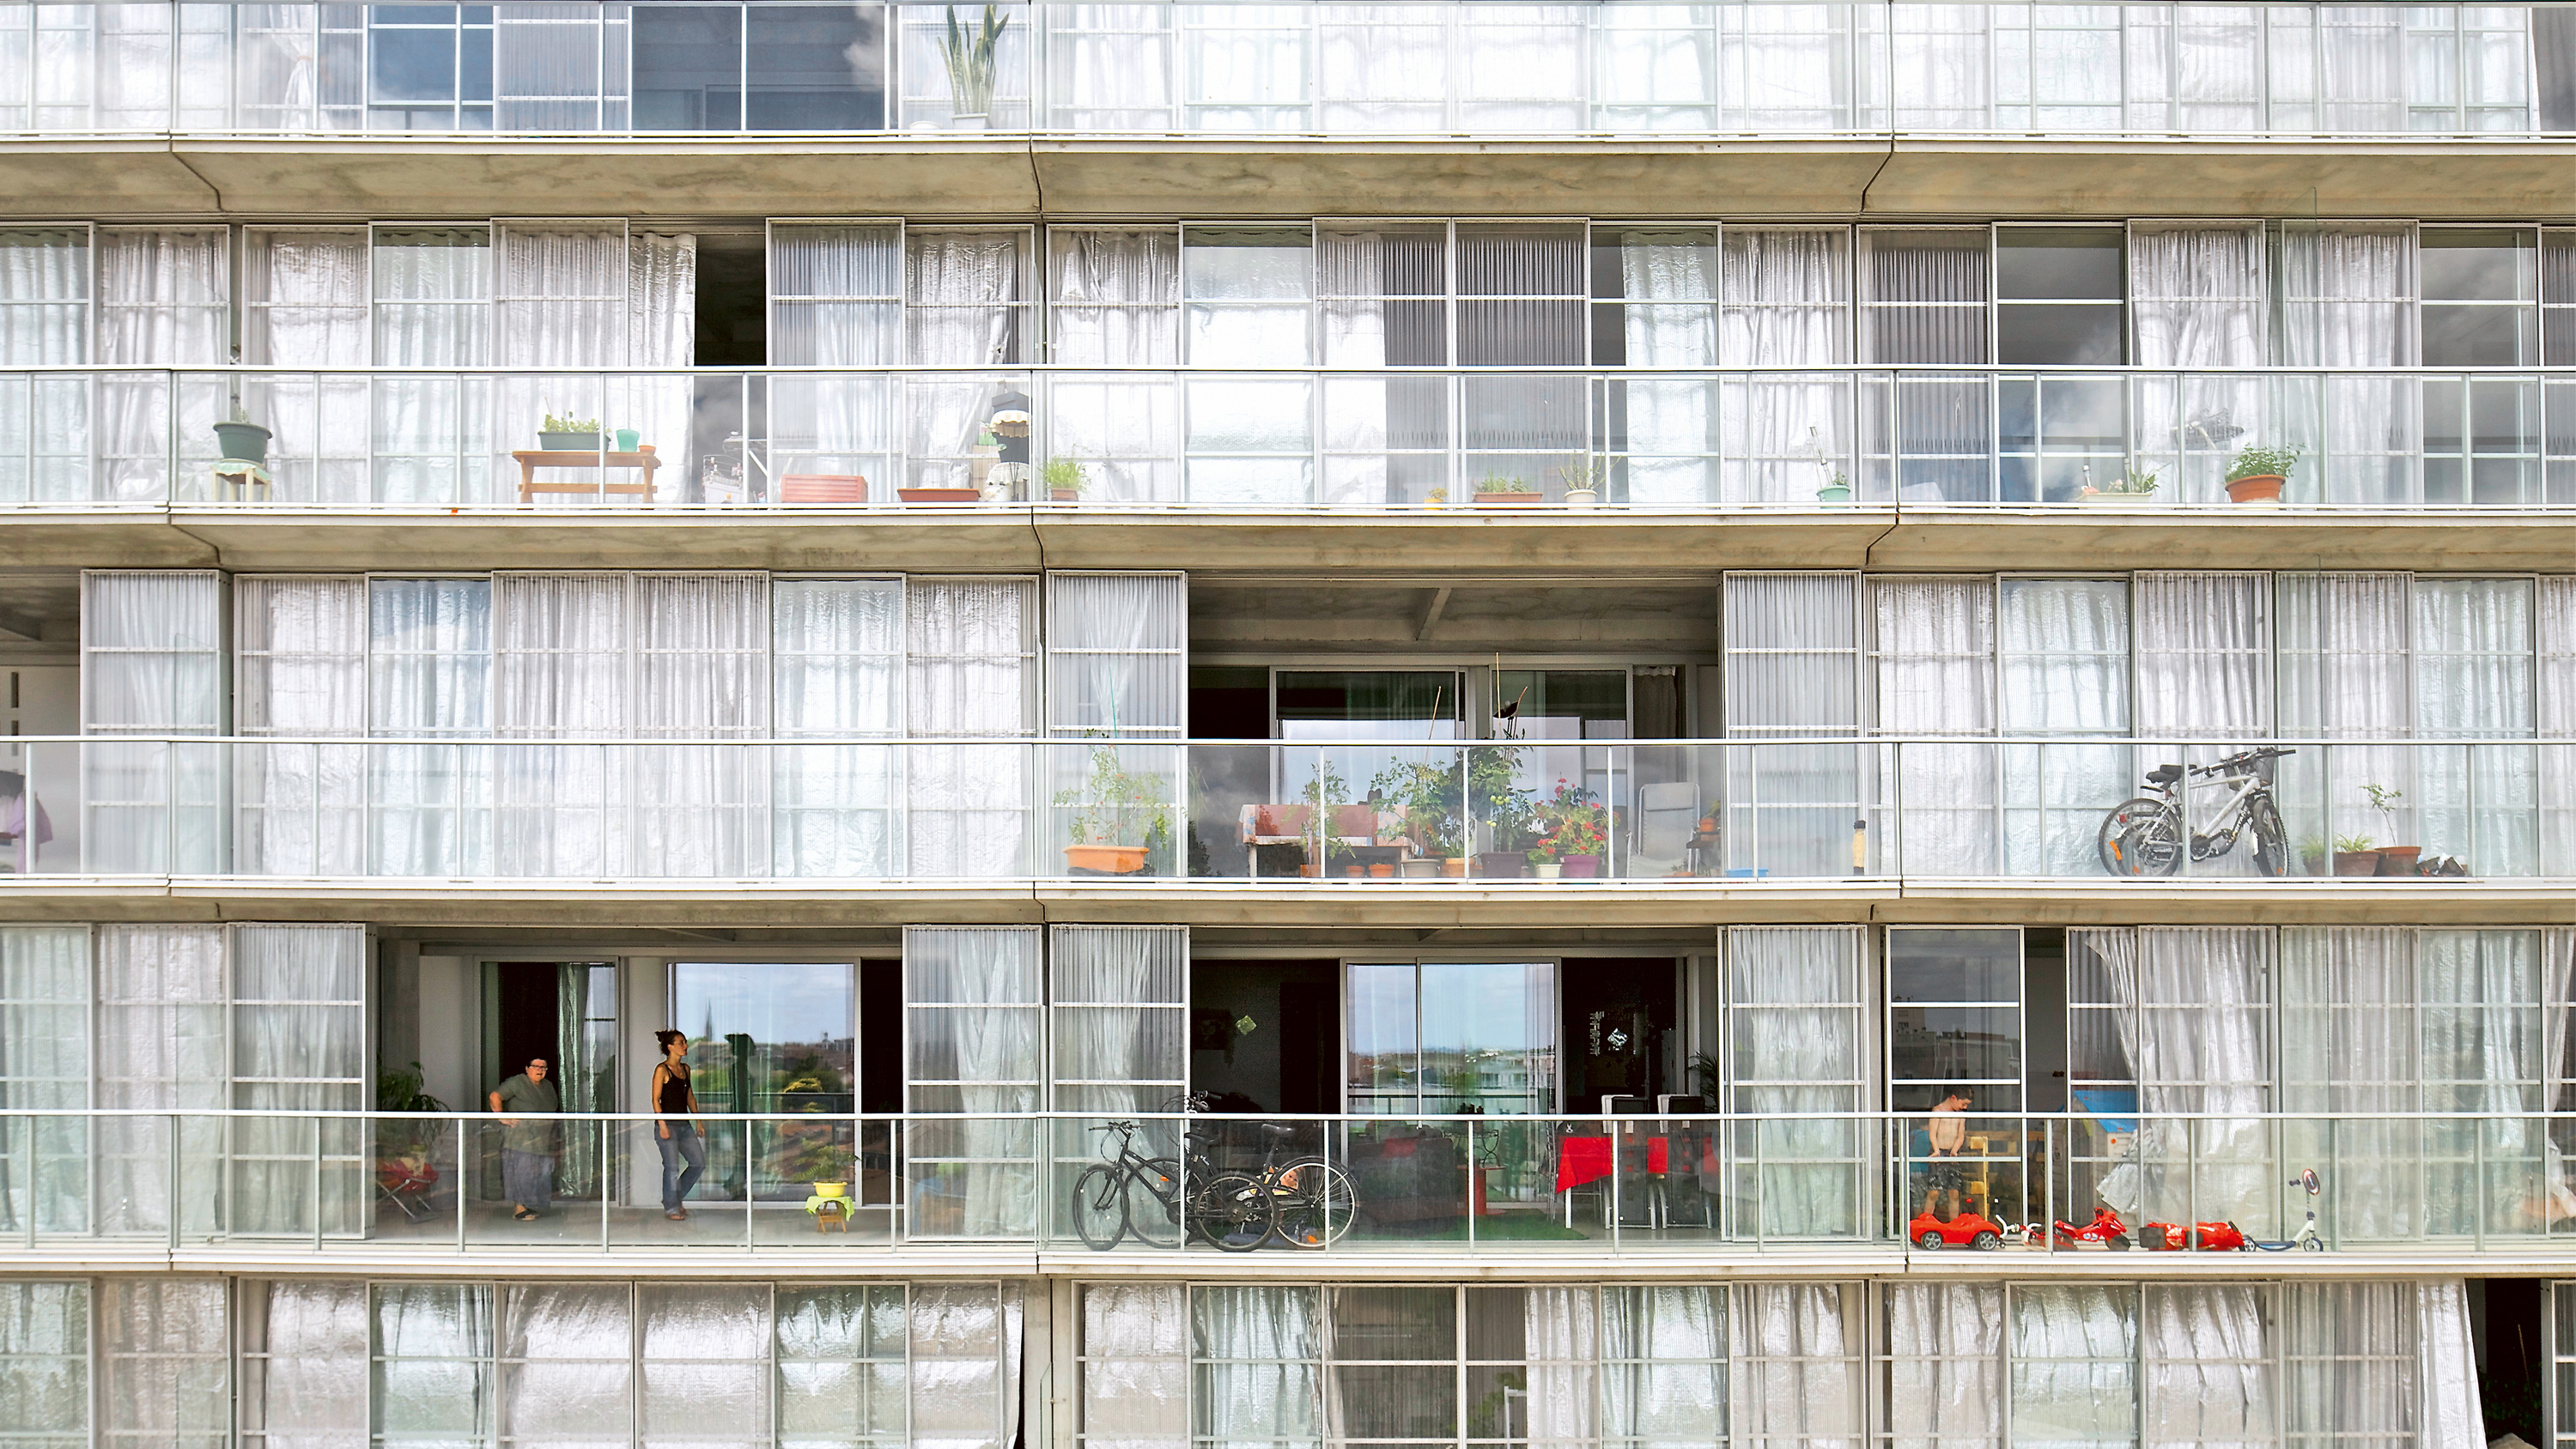 Deplete belief Democratic Party New Collective Housing in France | Arquitectura Viva